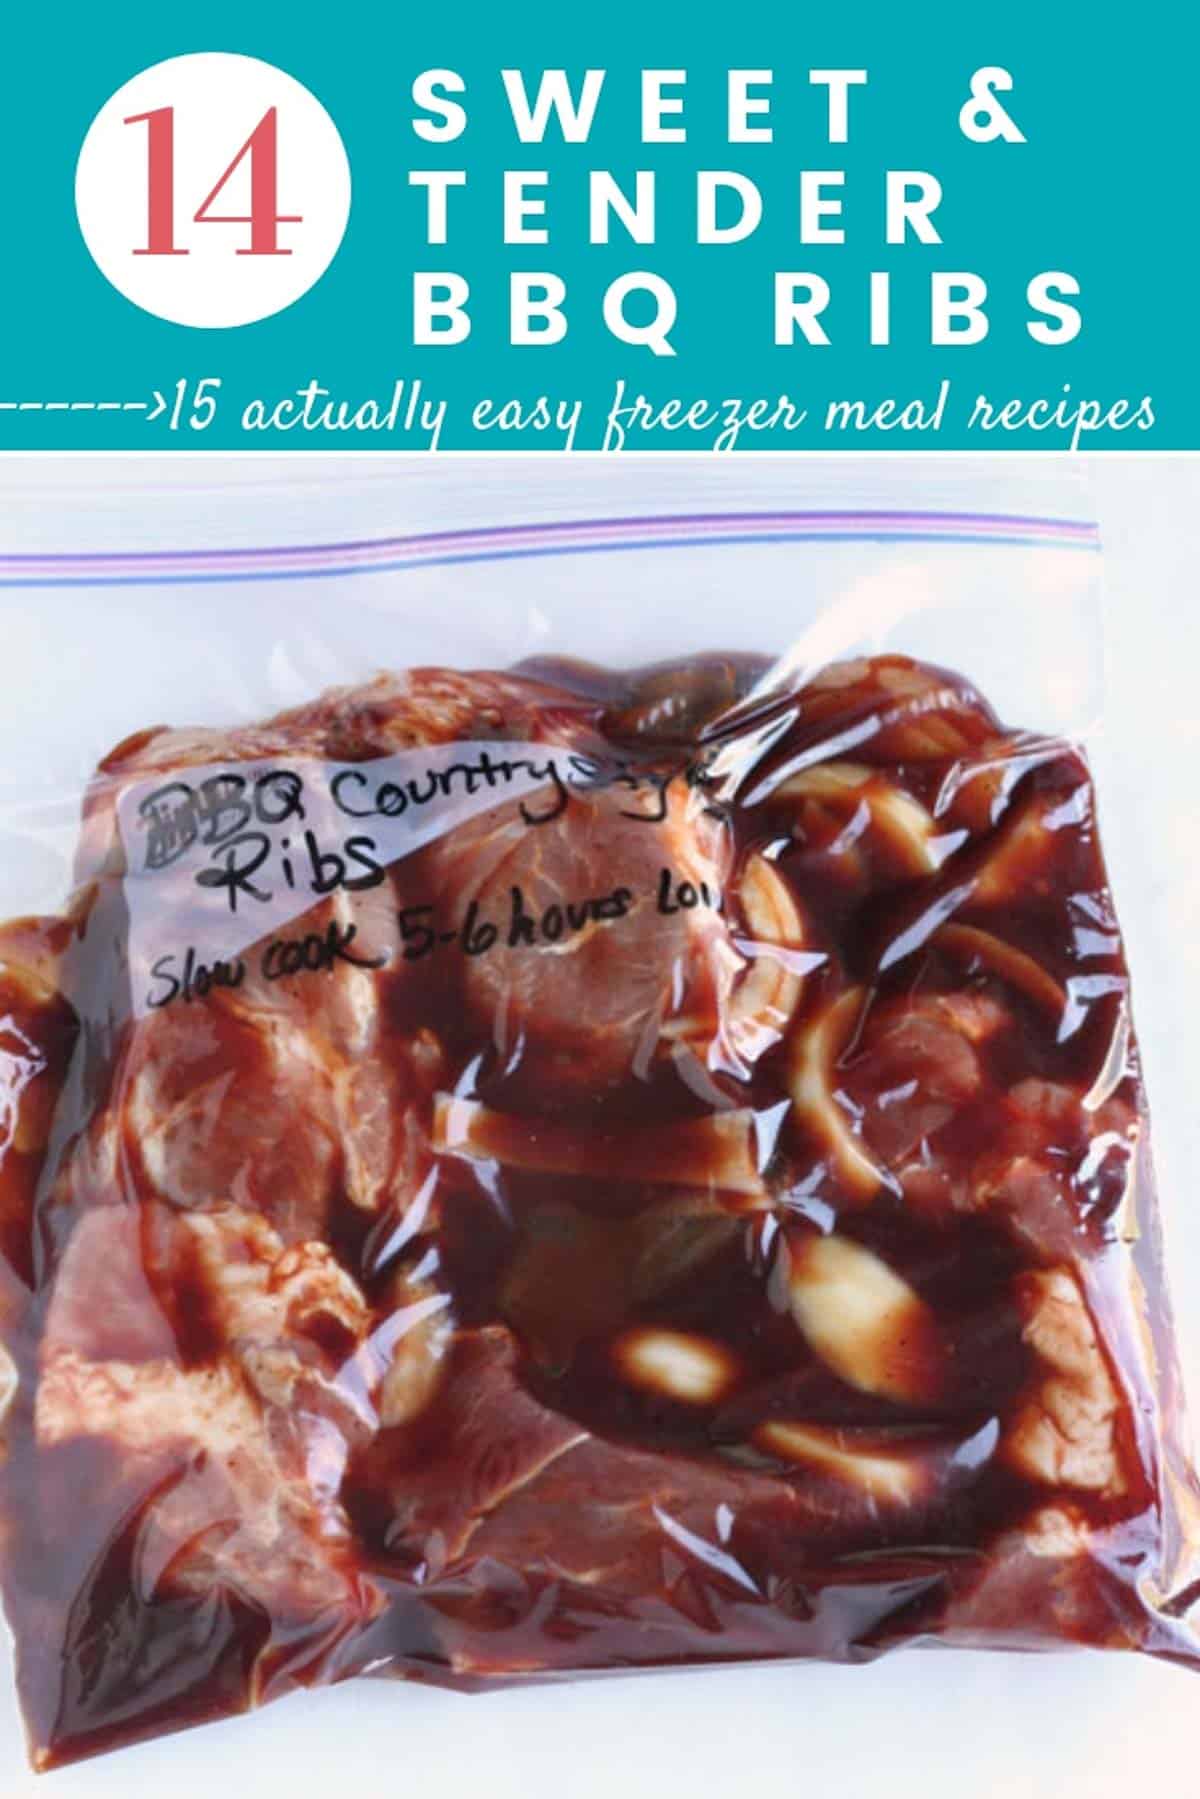 EASY FREEZER MEALS perfect for beginners like these BBQ Ribs for the slowcooker